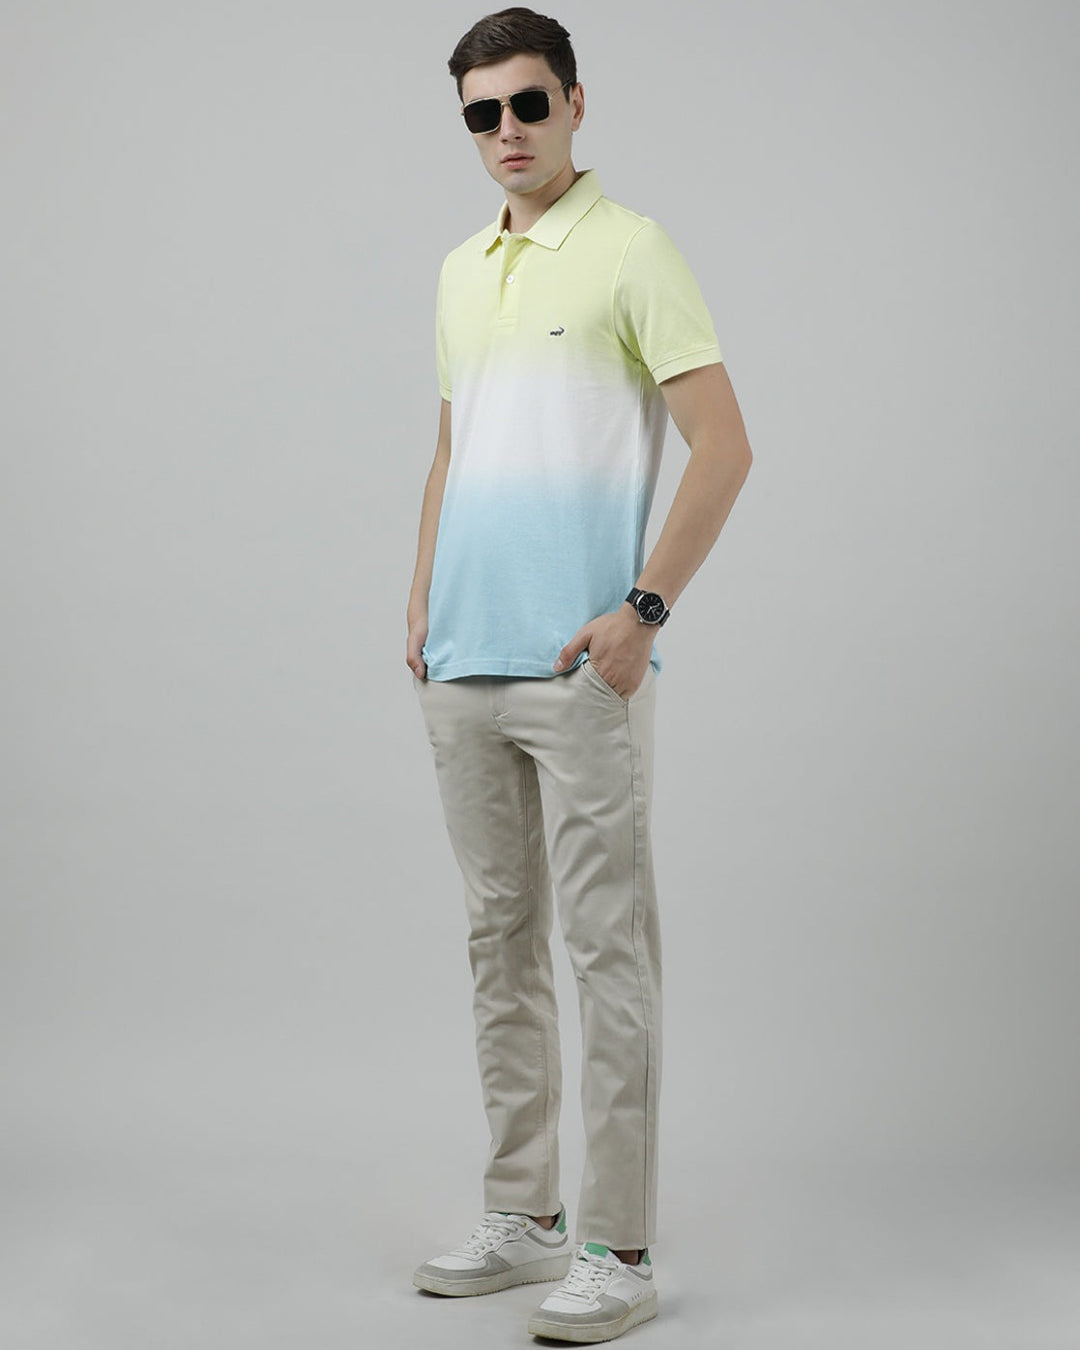 Crocodile Casual Yellow T-Shirt Half Sleeve Slim Fit with Collar for Men